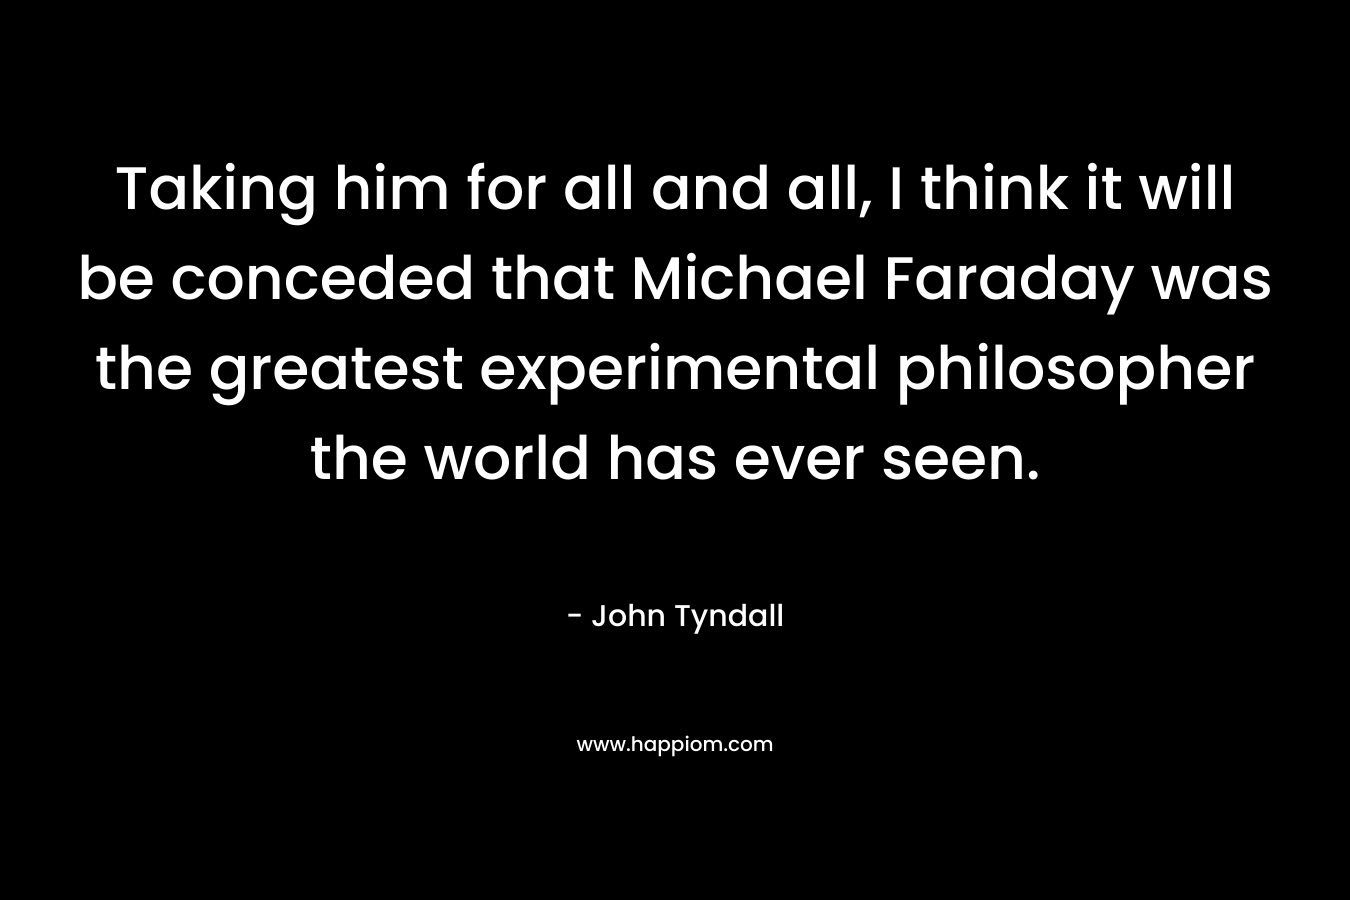 Taking him for all and all, I think it will be conceded that Michael Faraday was the greatest experimental philosopher the world has ever seen. – John Tyndall